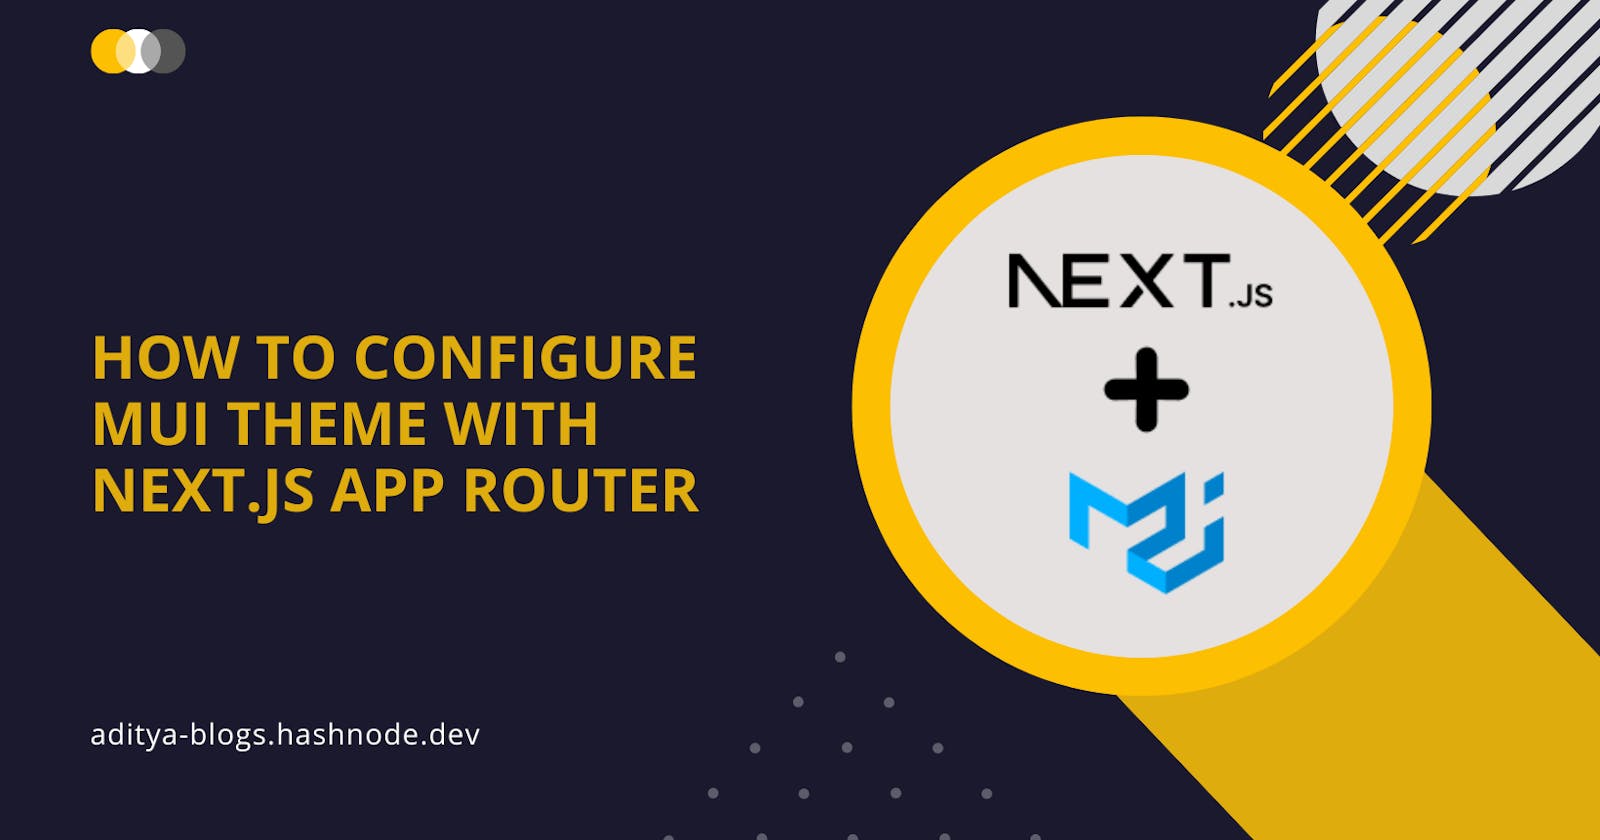 How To Configure MUI Theme with Next.js App Router